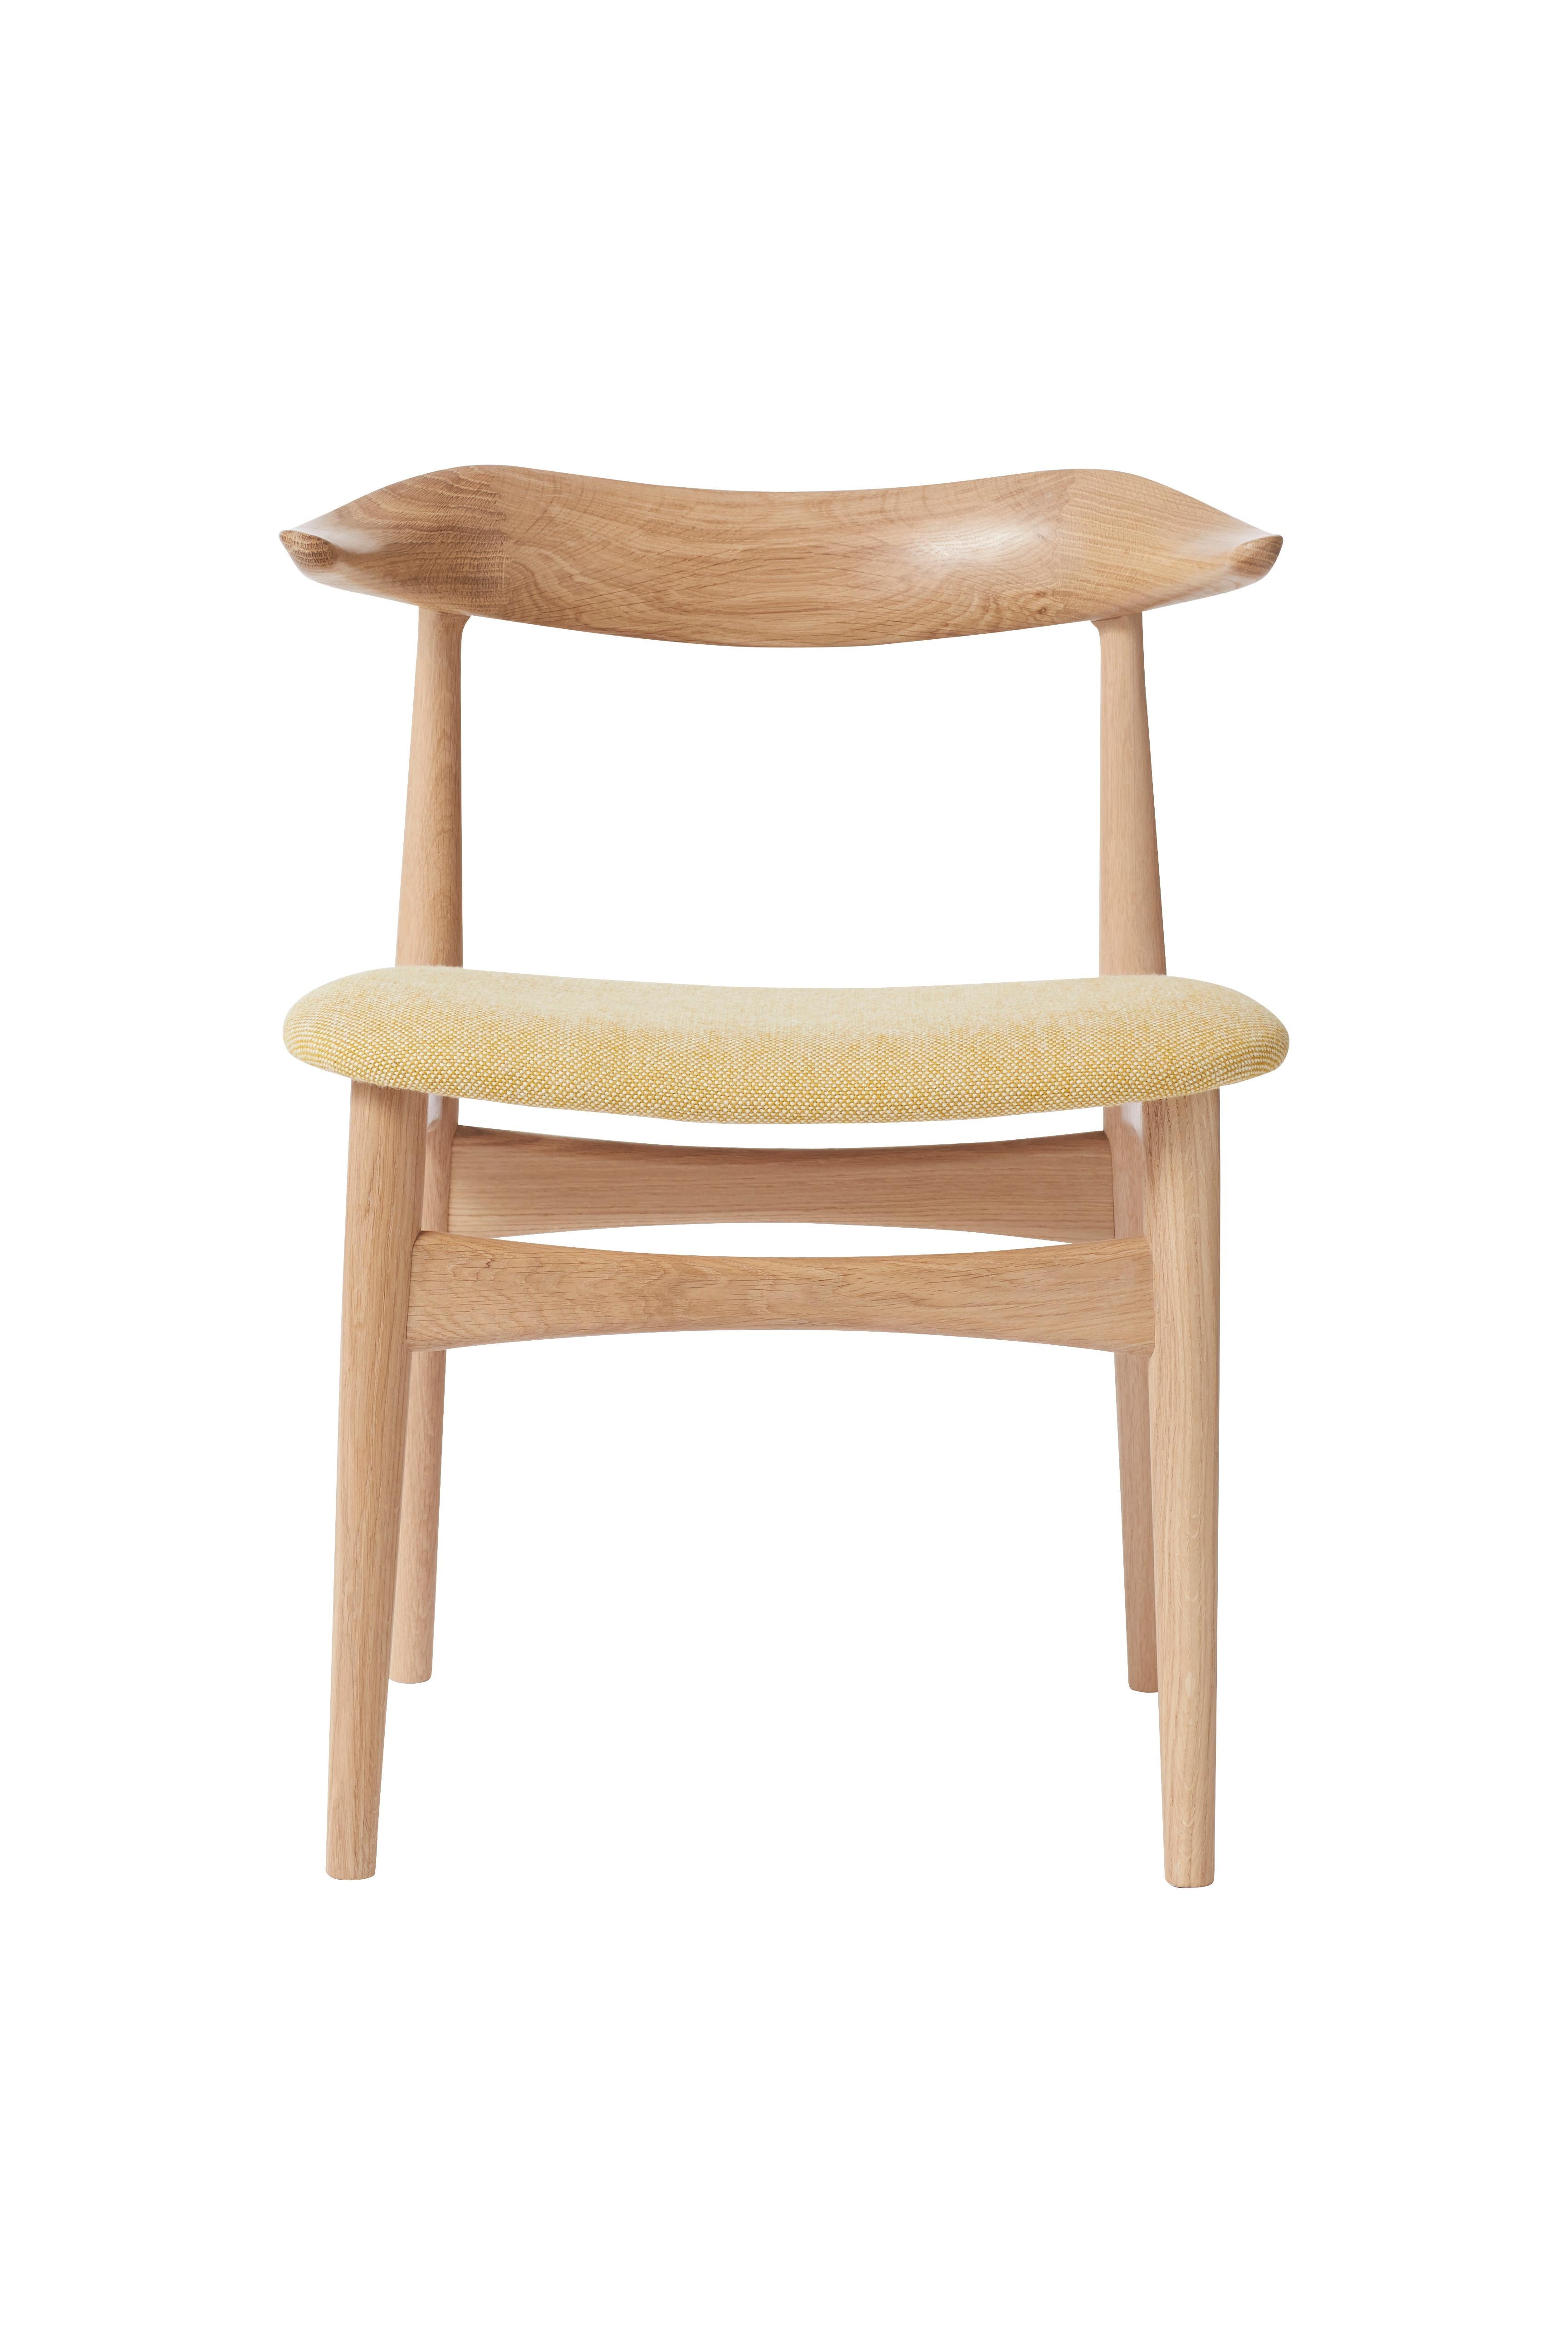 For Sale: Yellow (Hallingdal 407) Cow Horn Oak Chair, by Knud Færch from Warm Nordic